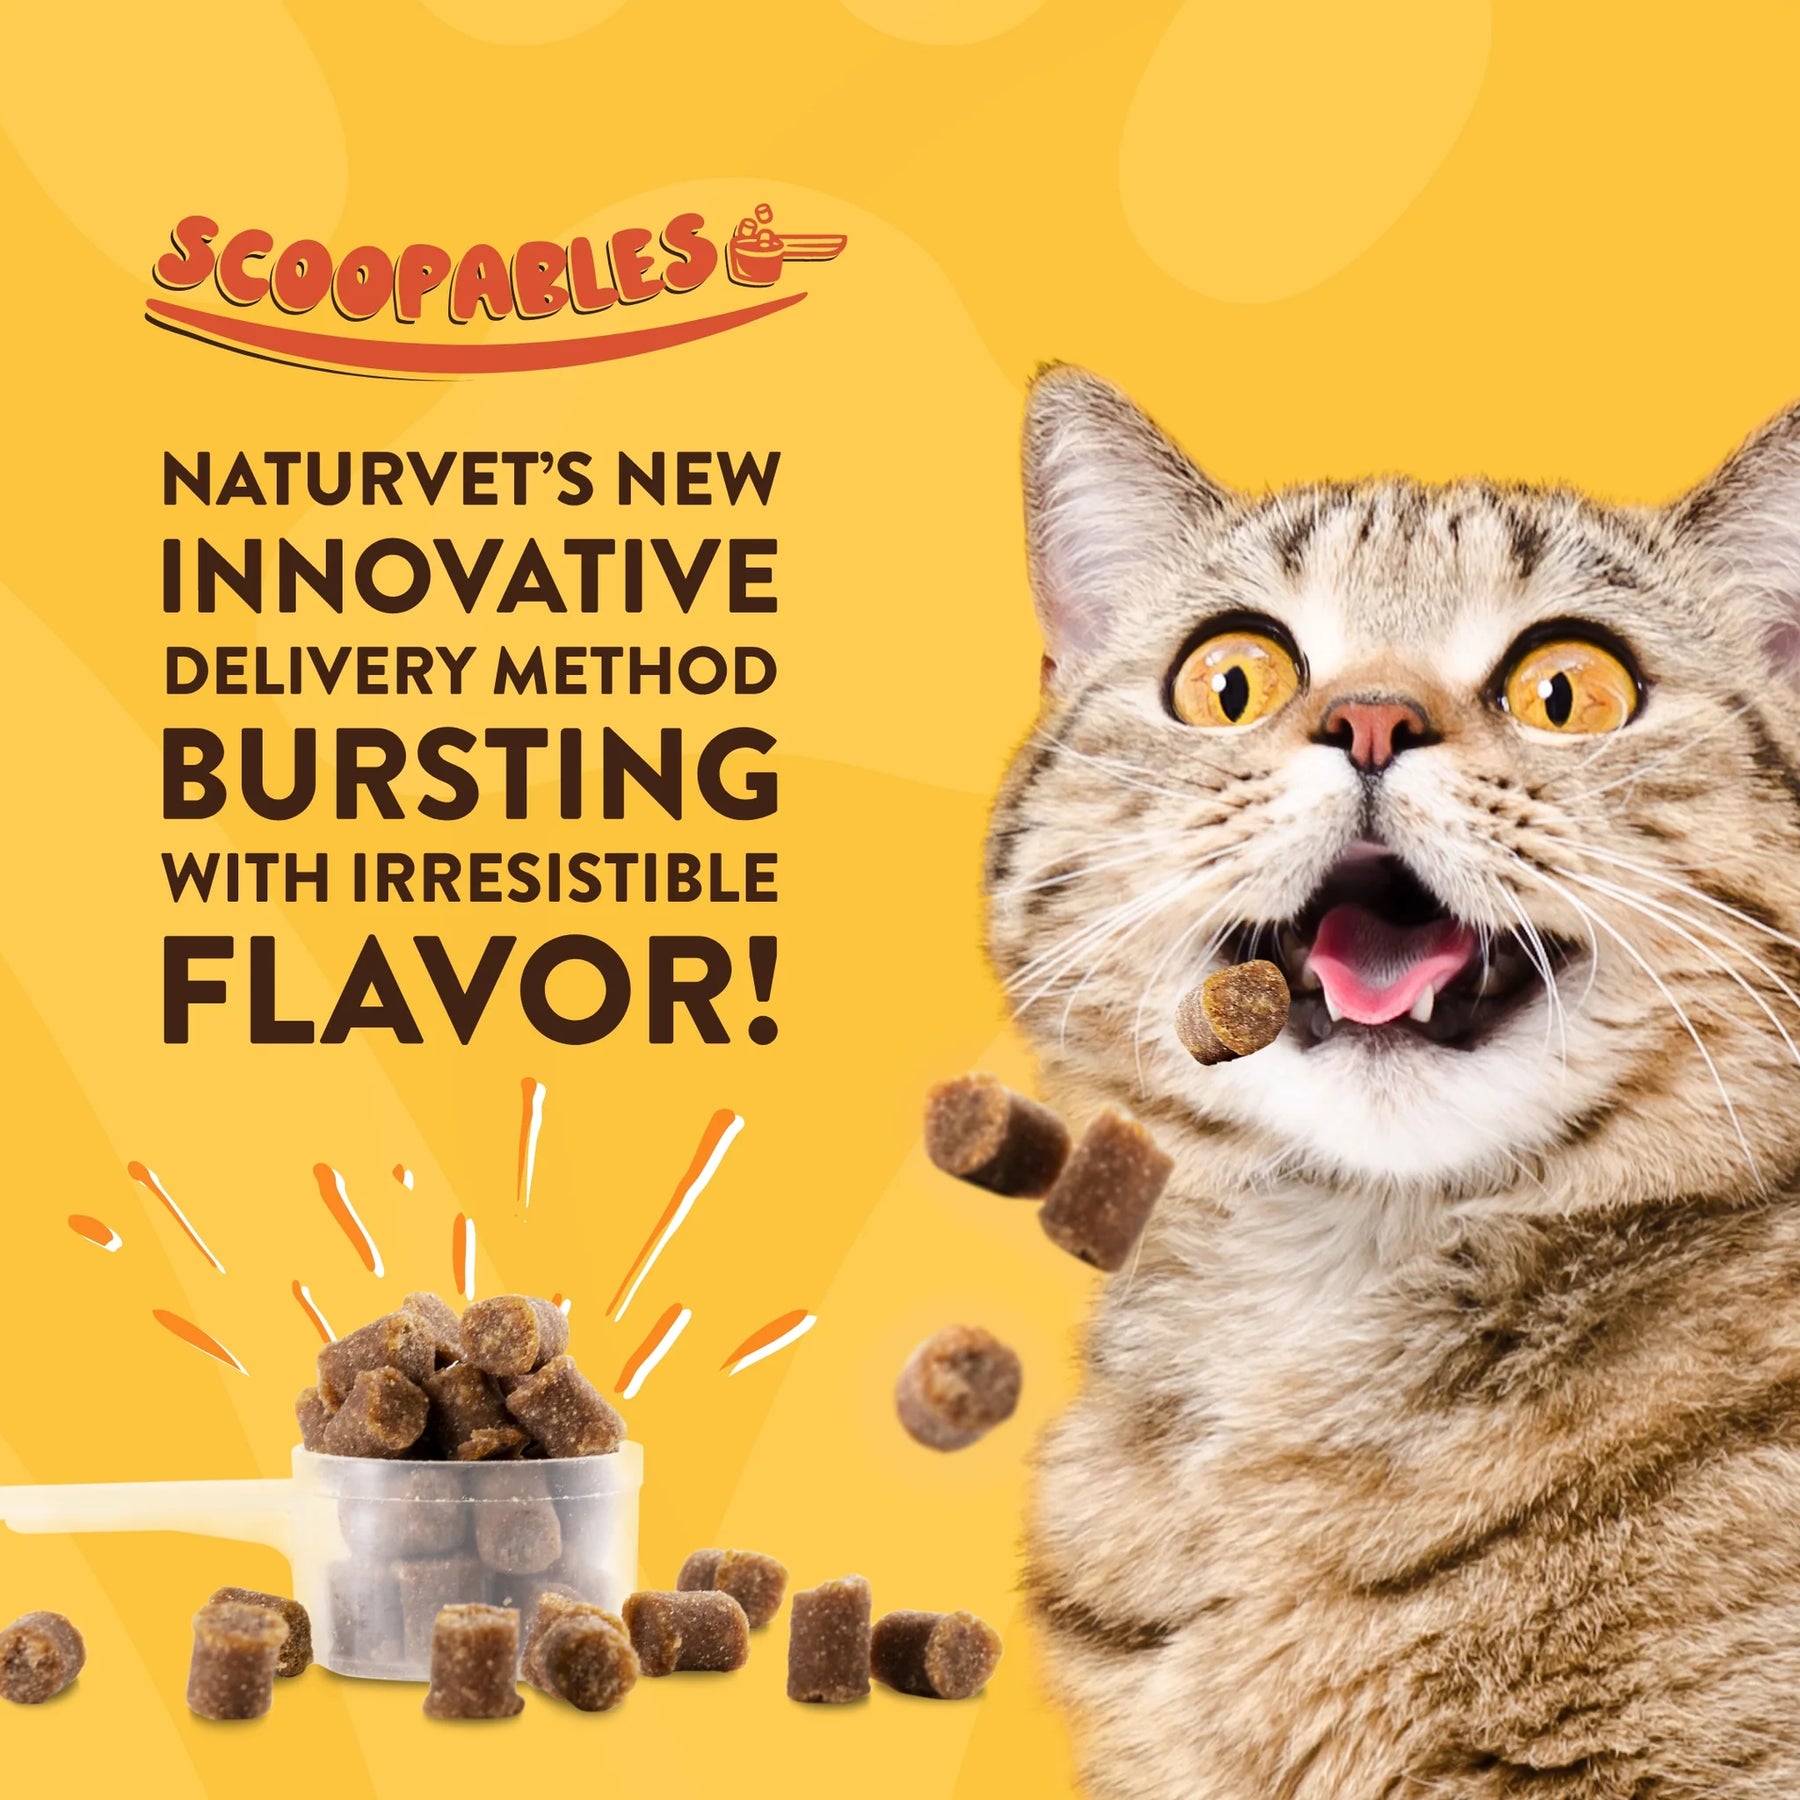 NaturVet - Scoopables Digestive Enzymes Daily Support Pre & Probiotic for Cats